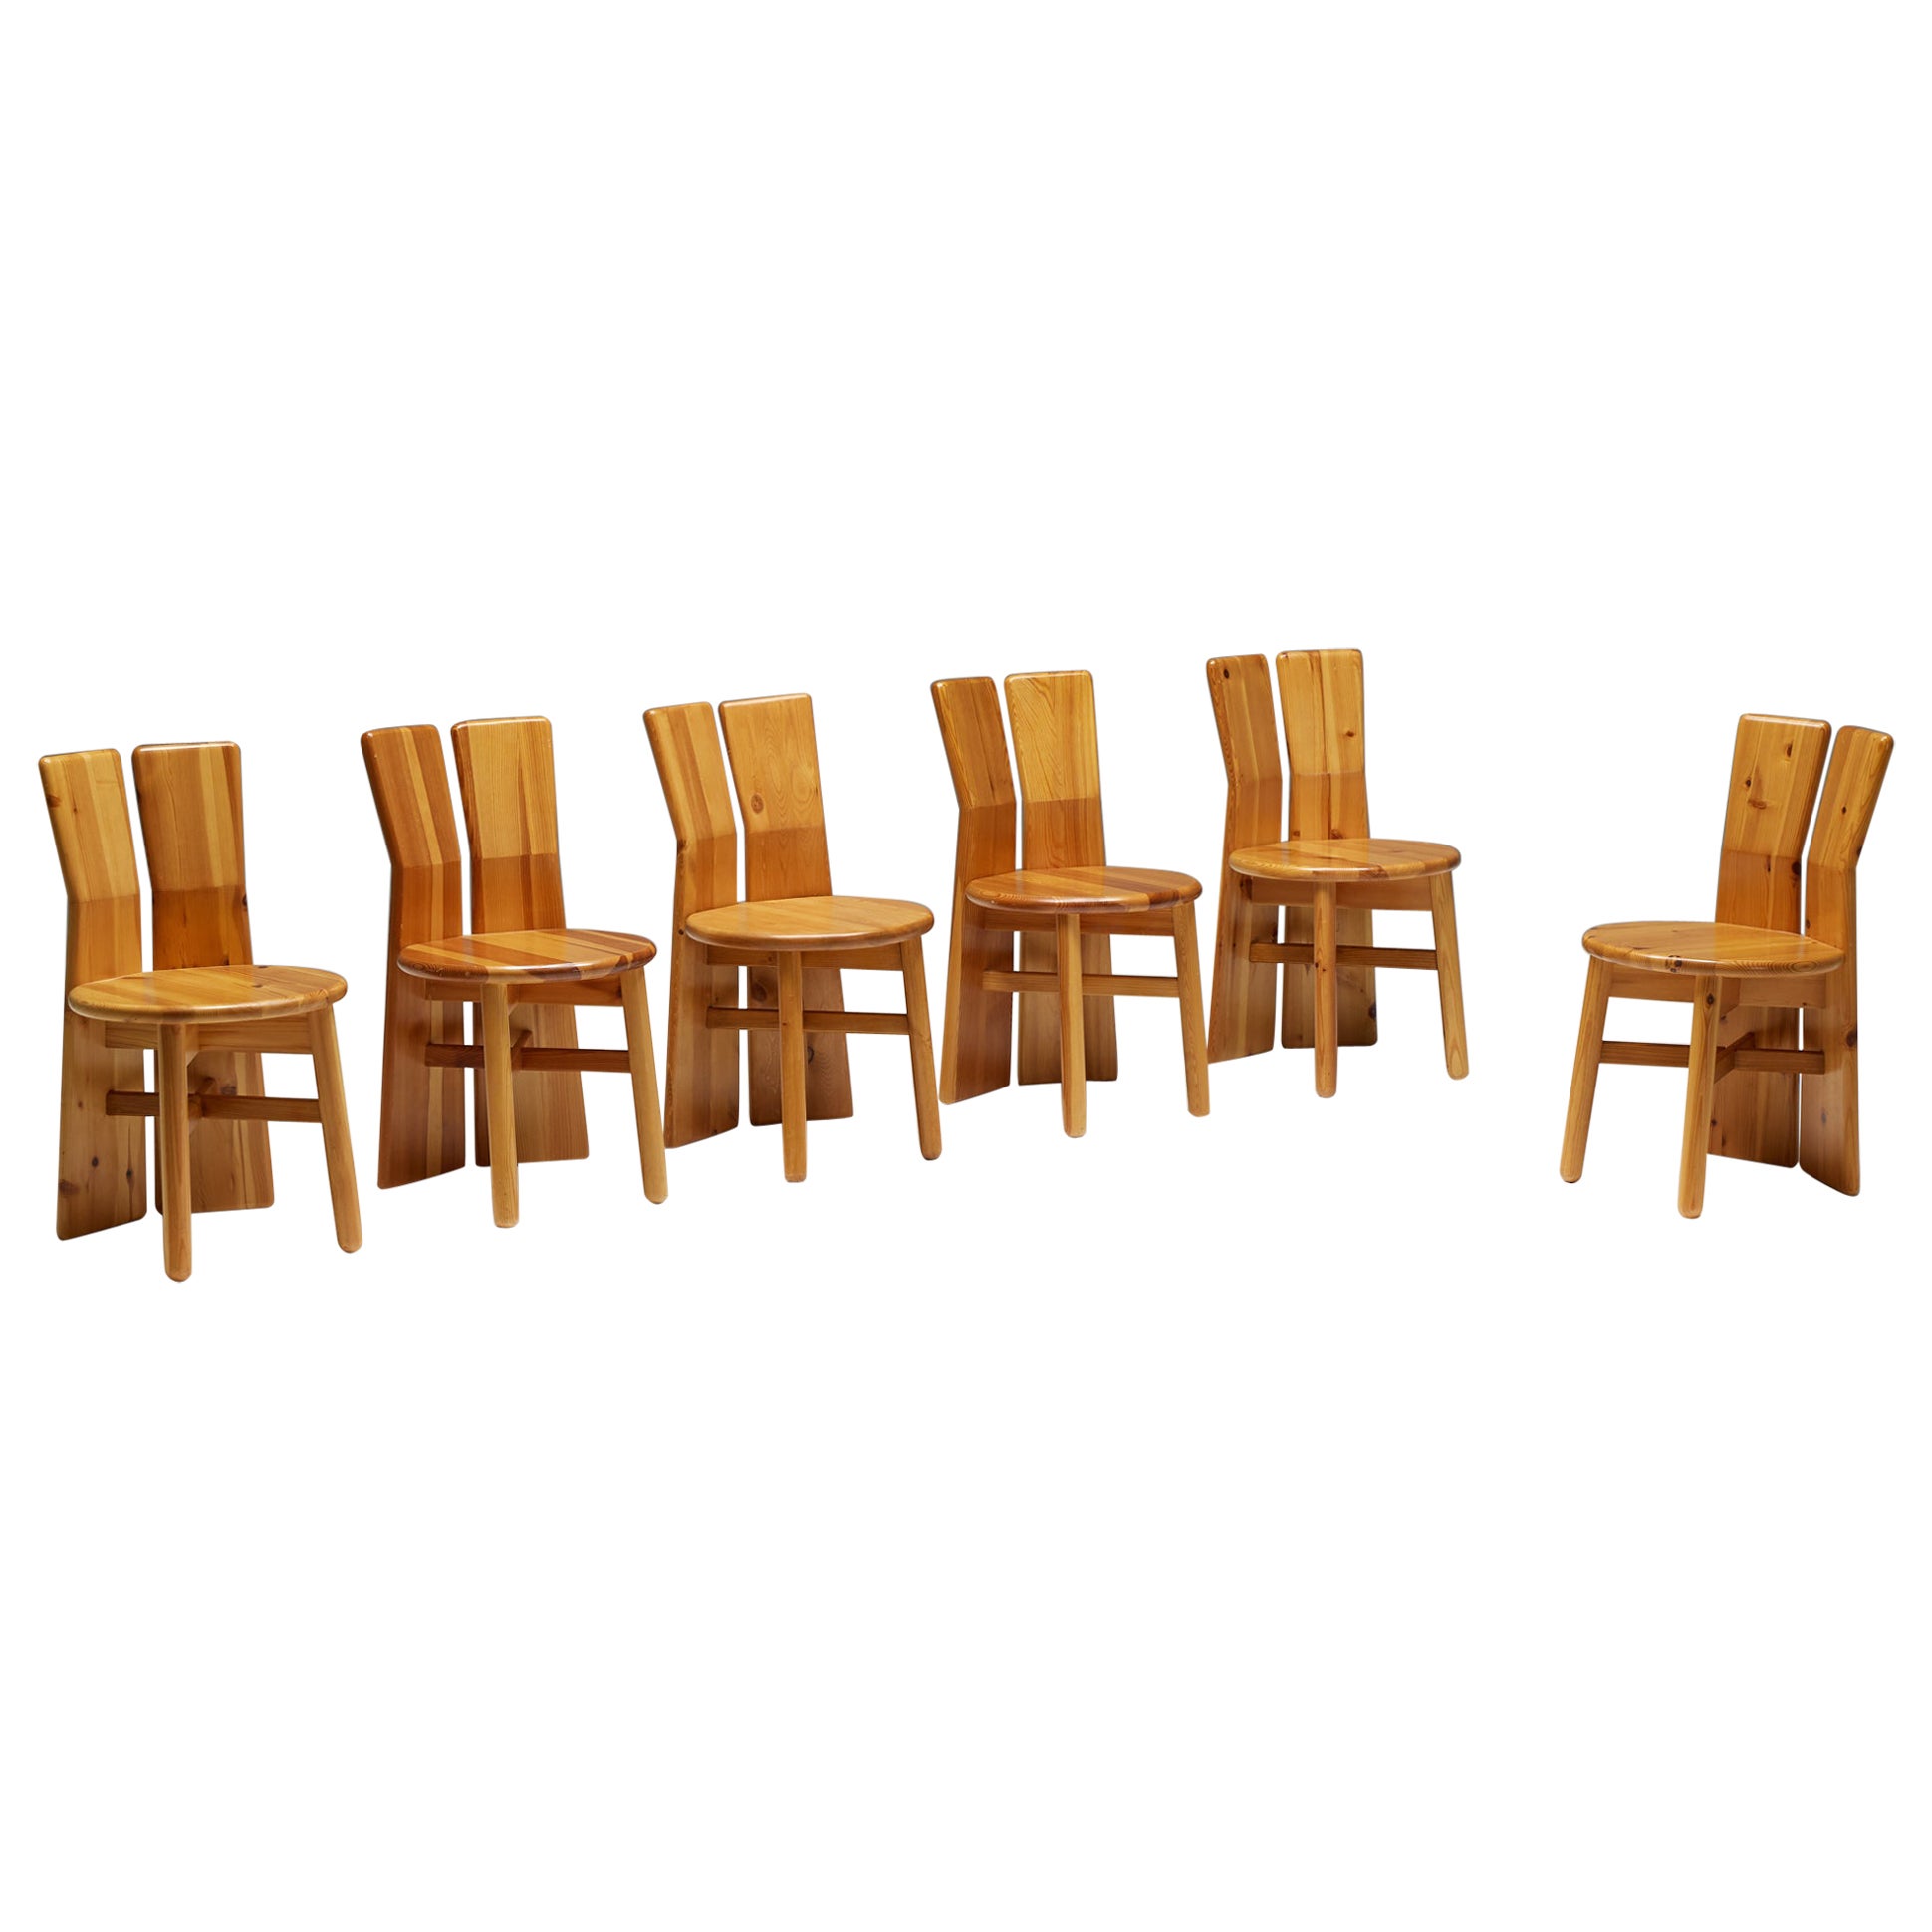 Italian Brutalist Pine Dining Chairs, Italy, 1970s For Sale